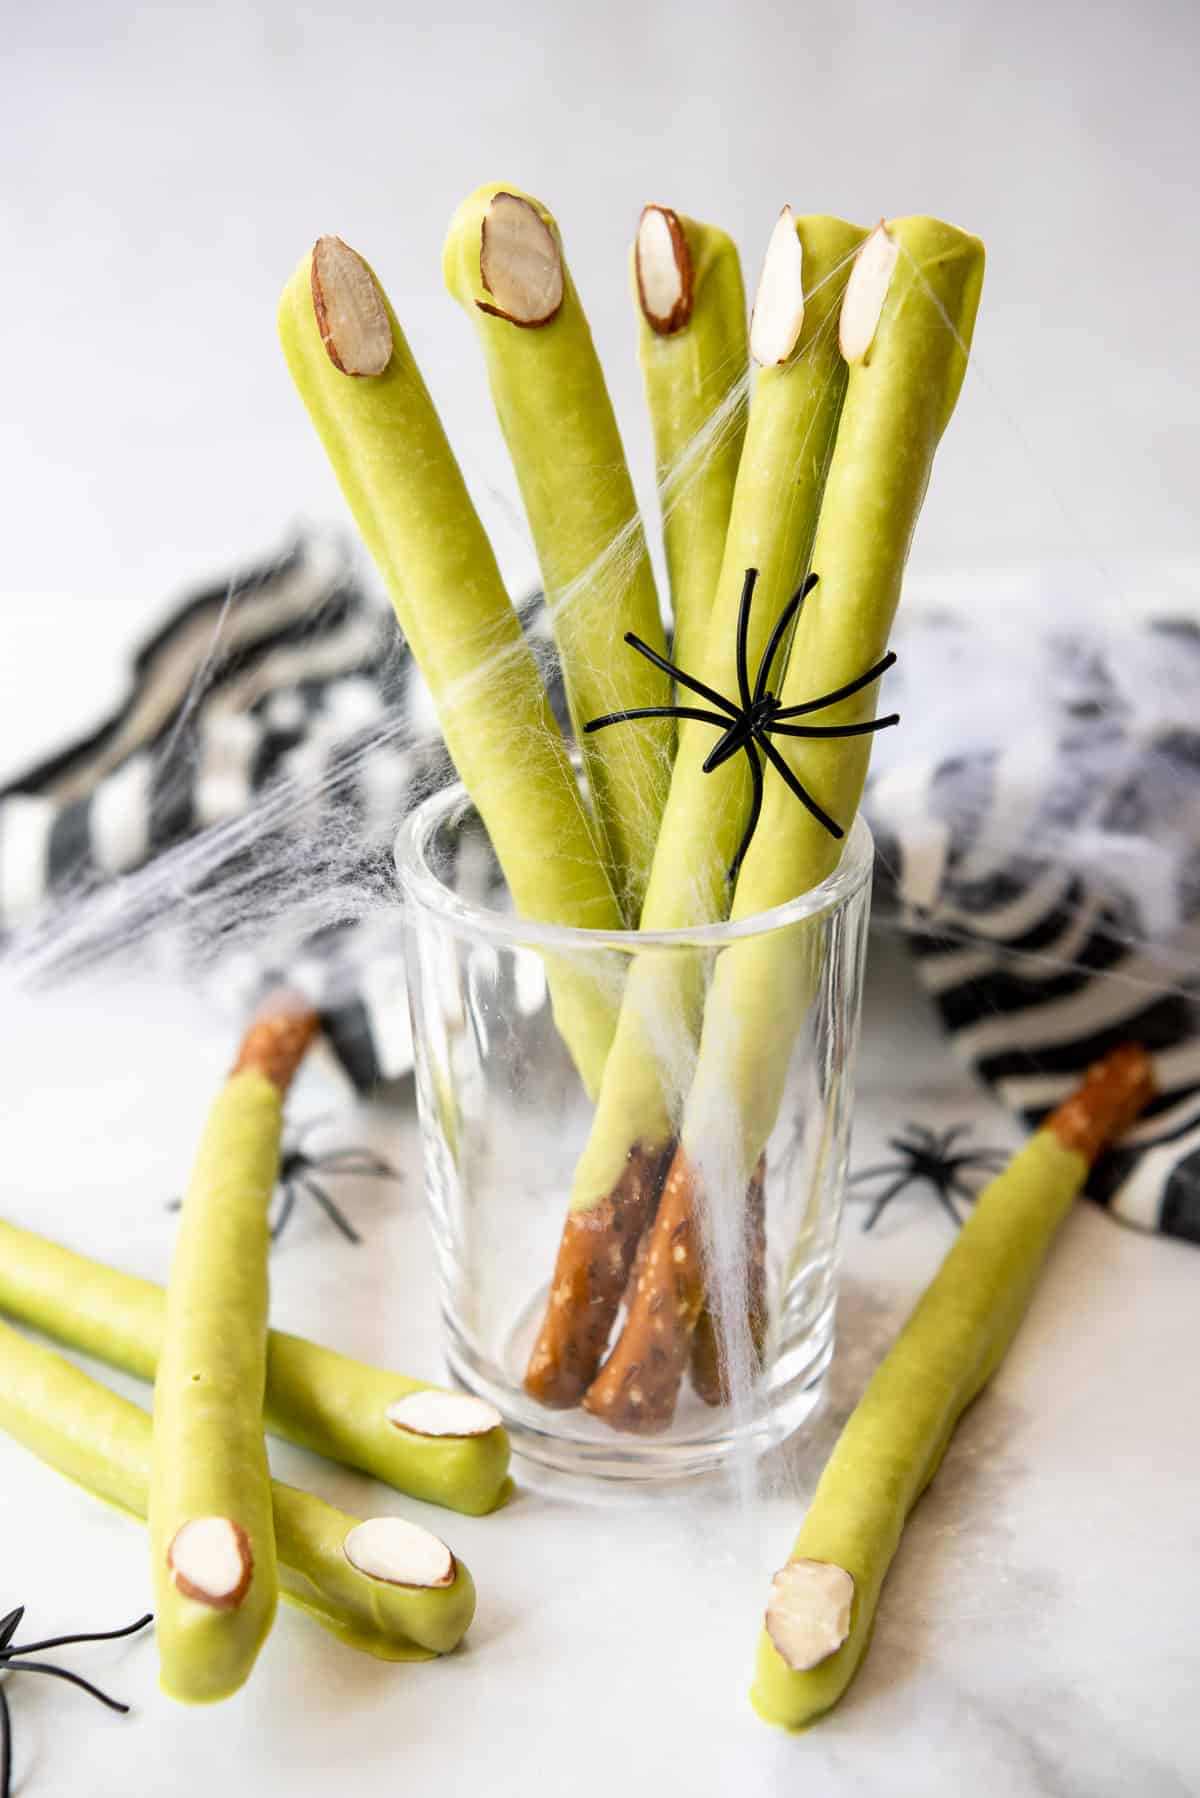 Green chocolate covered pretzels decorated like witch's fingers.